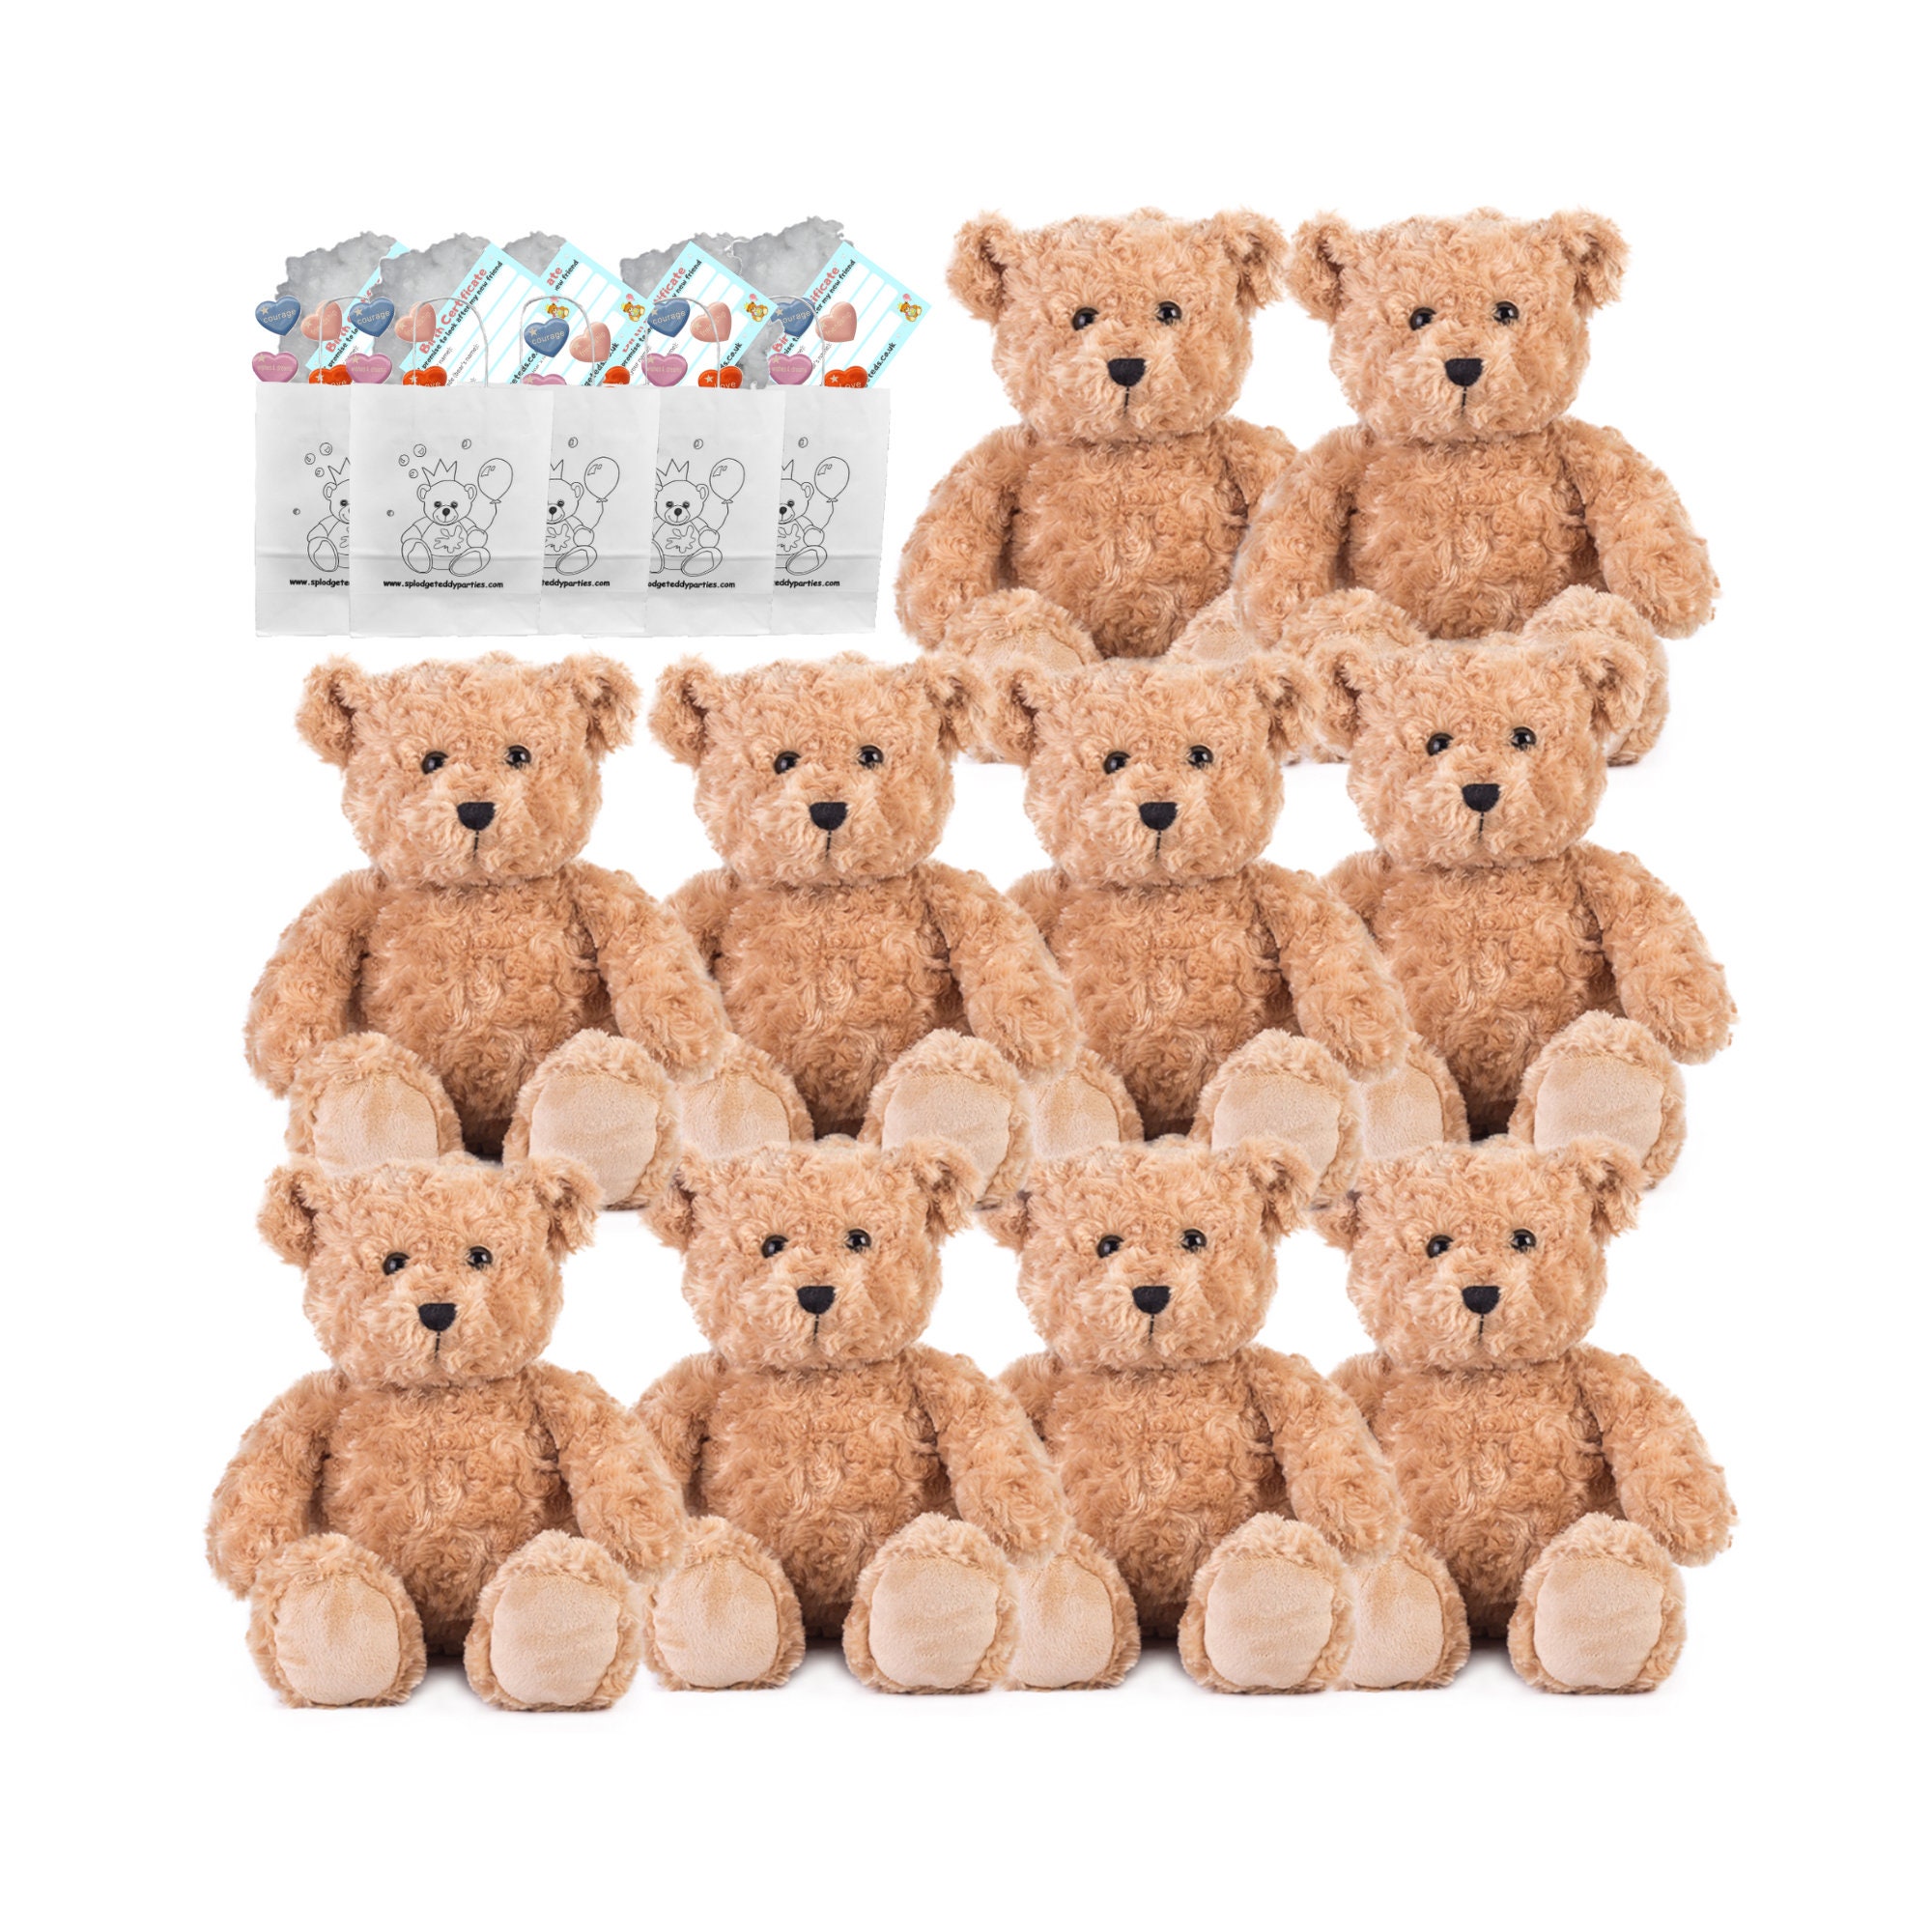 Teddy Bear Cotton Stuffing/ Doll & Toy Stuffing / for Teddy Bear Making 